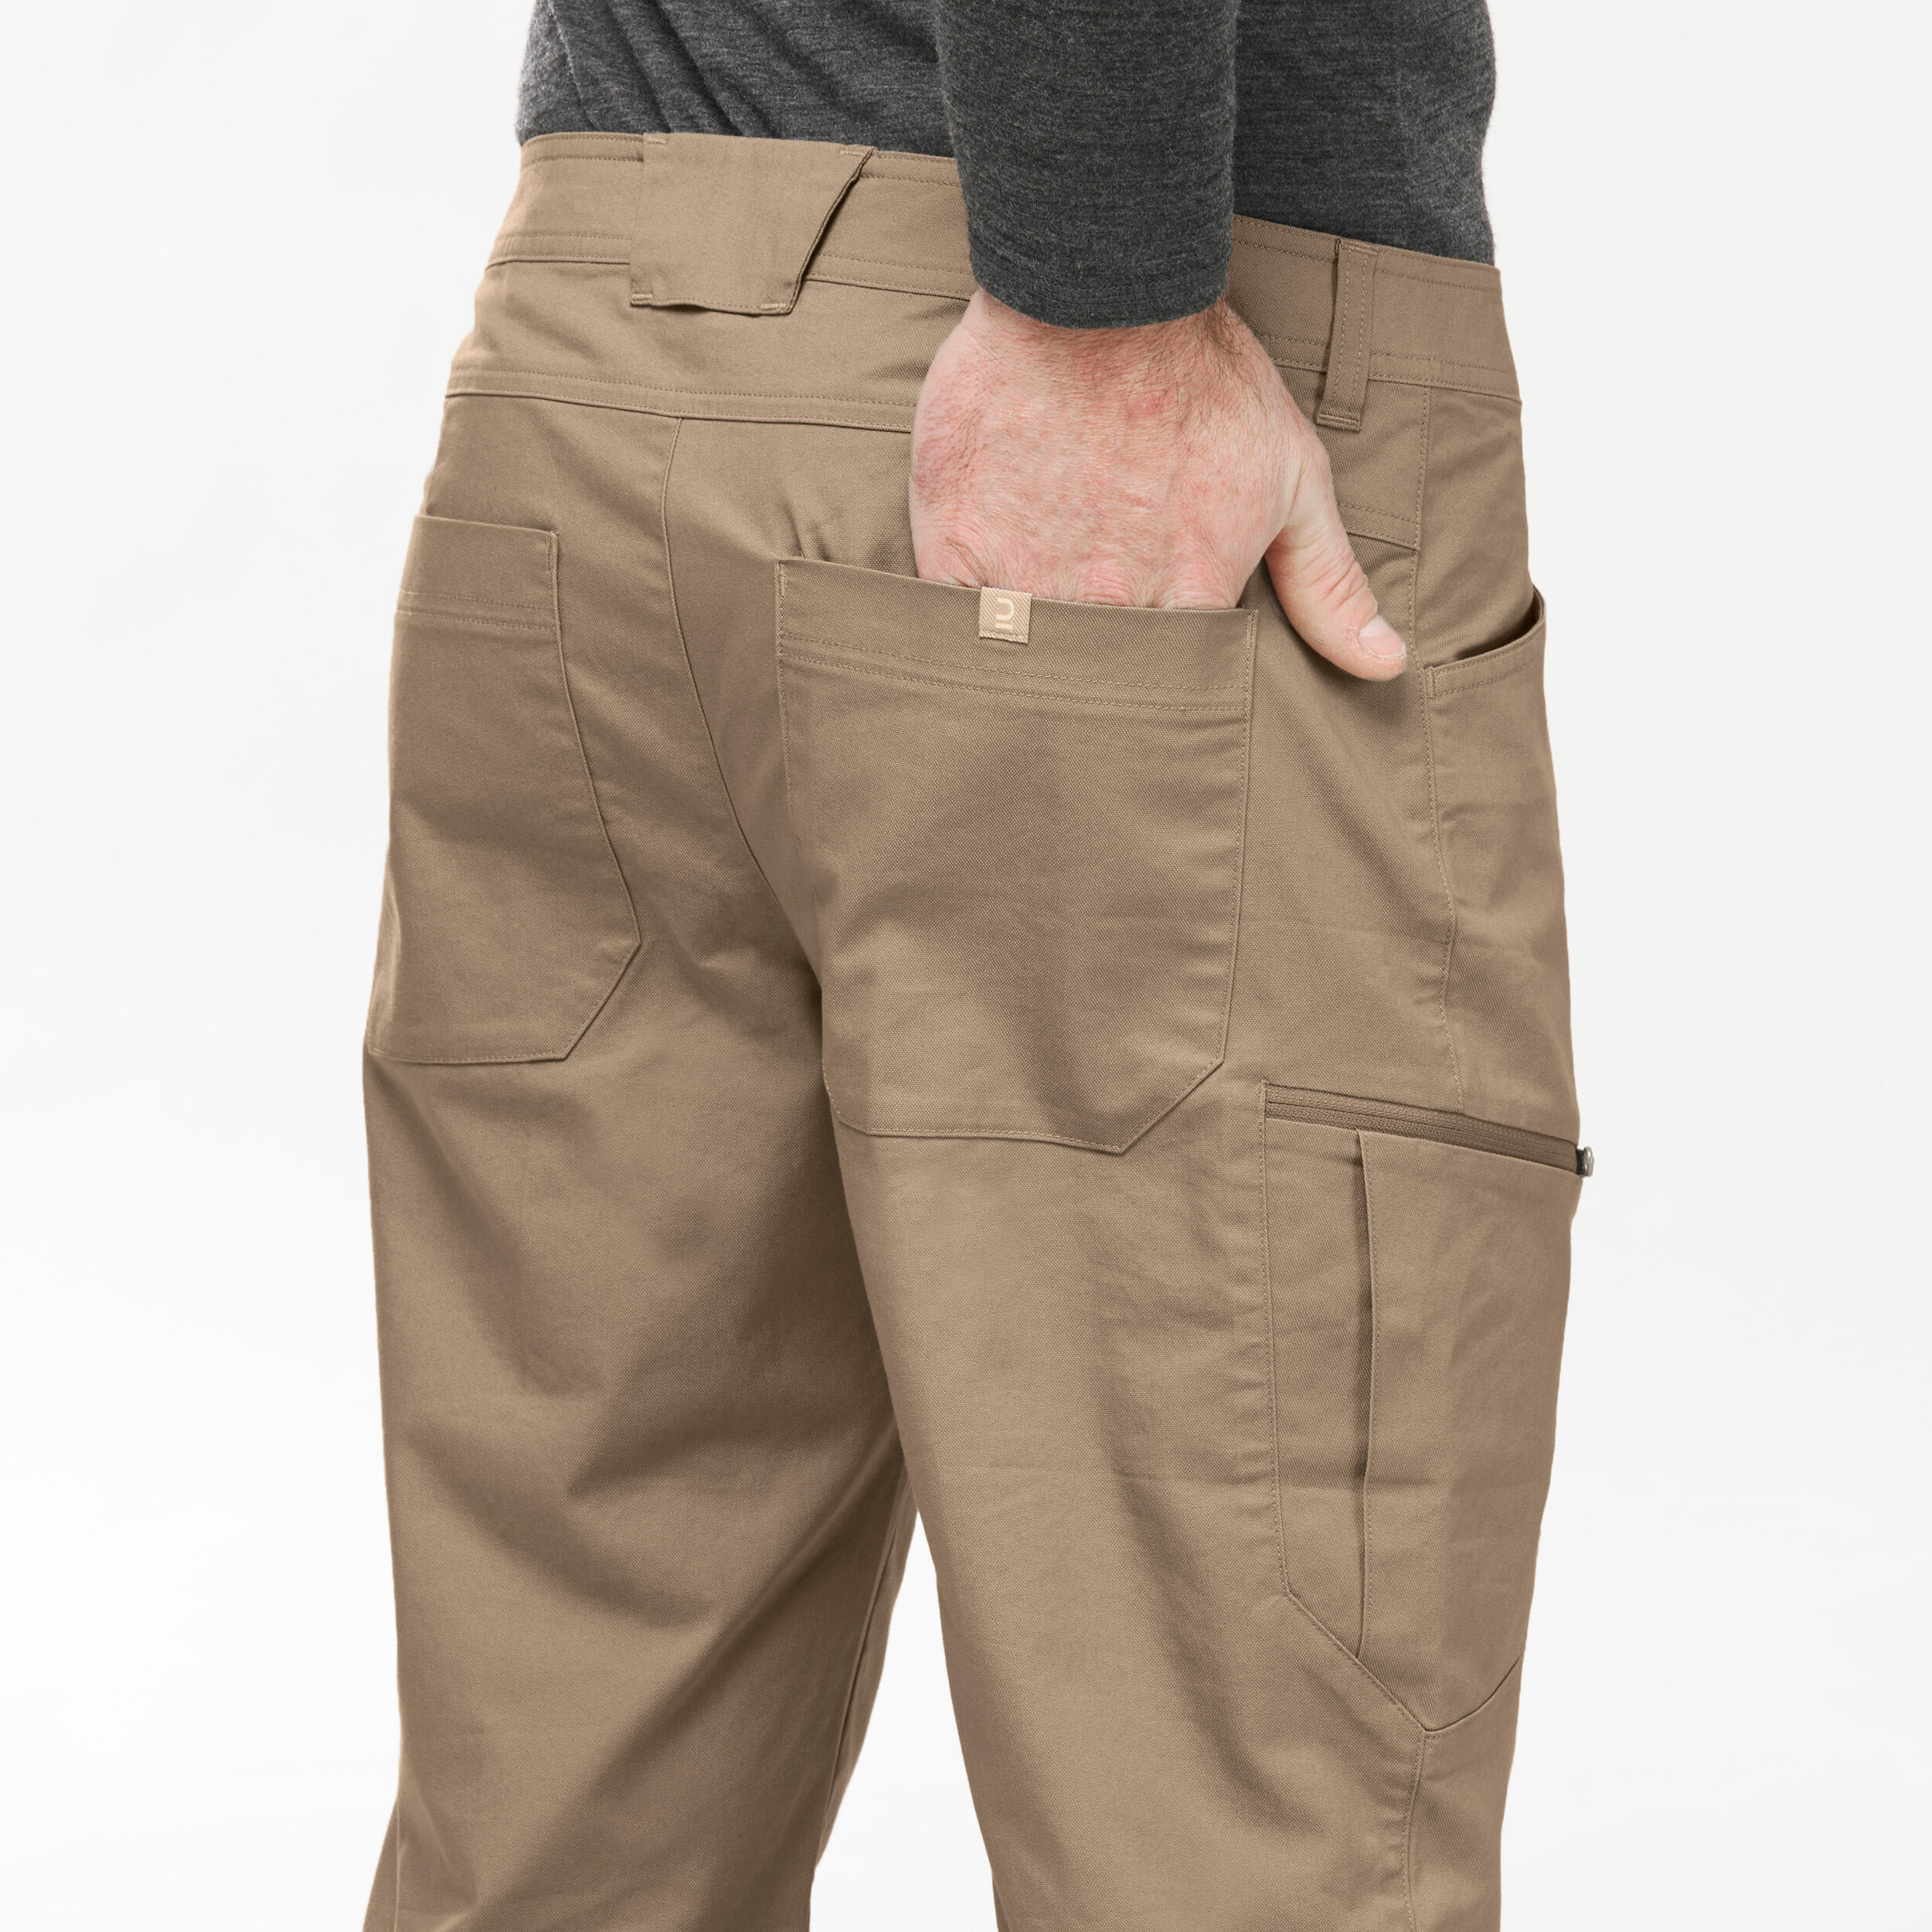 Buy Mens Hiking Pant Online  Quechua NH500 Mens Trouser for Hiking